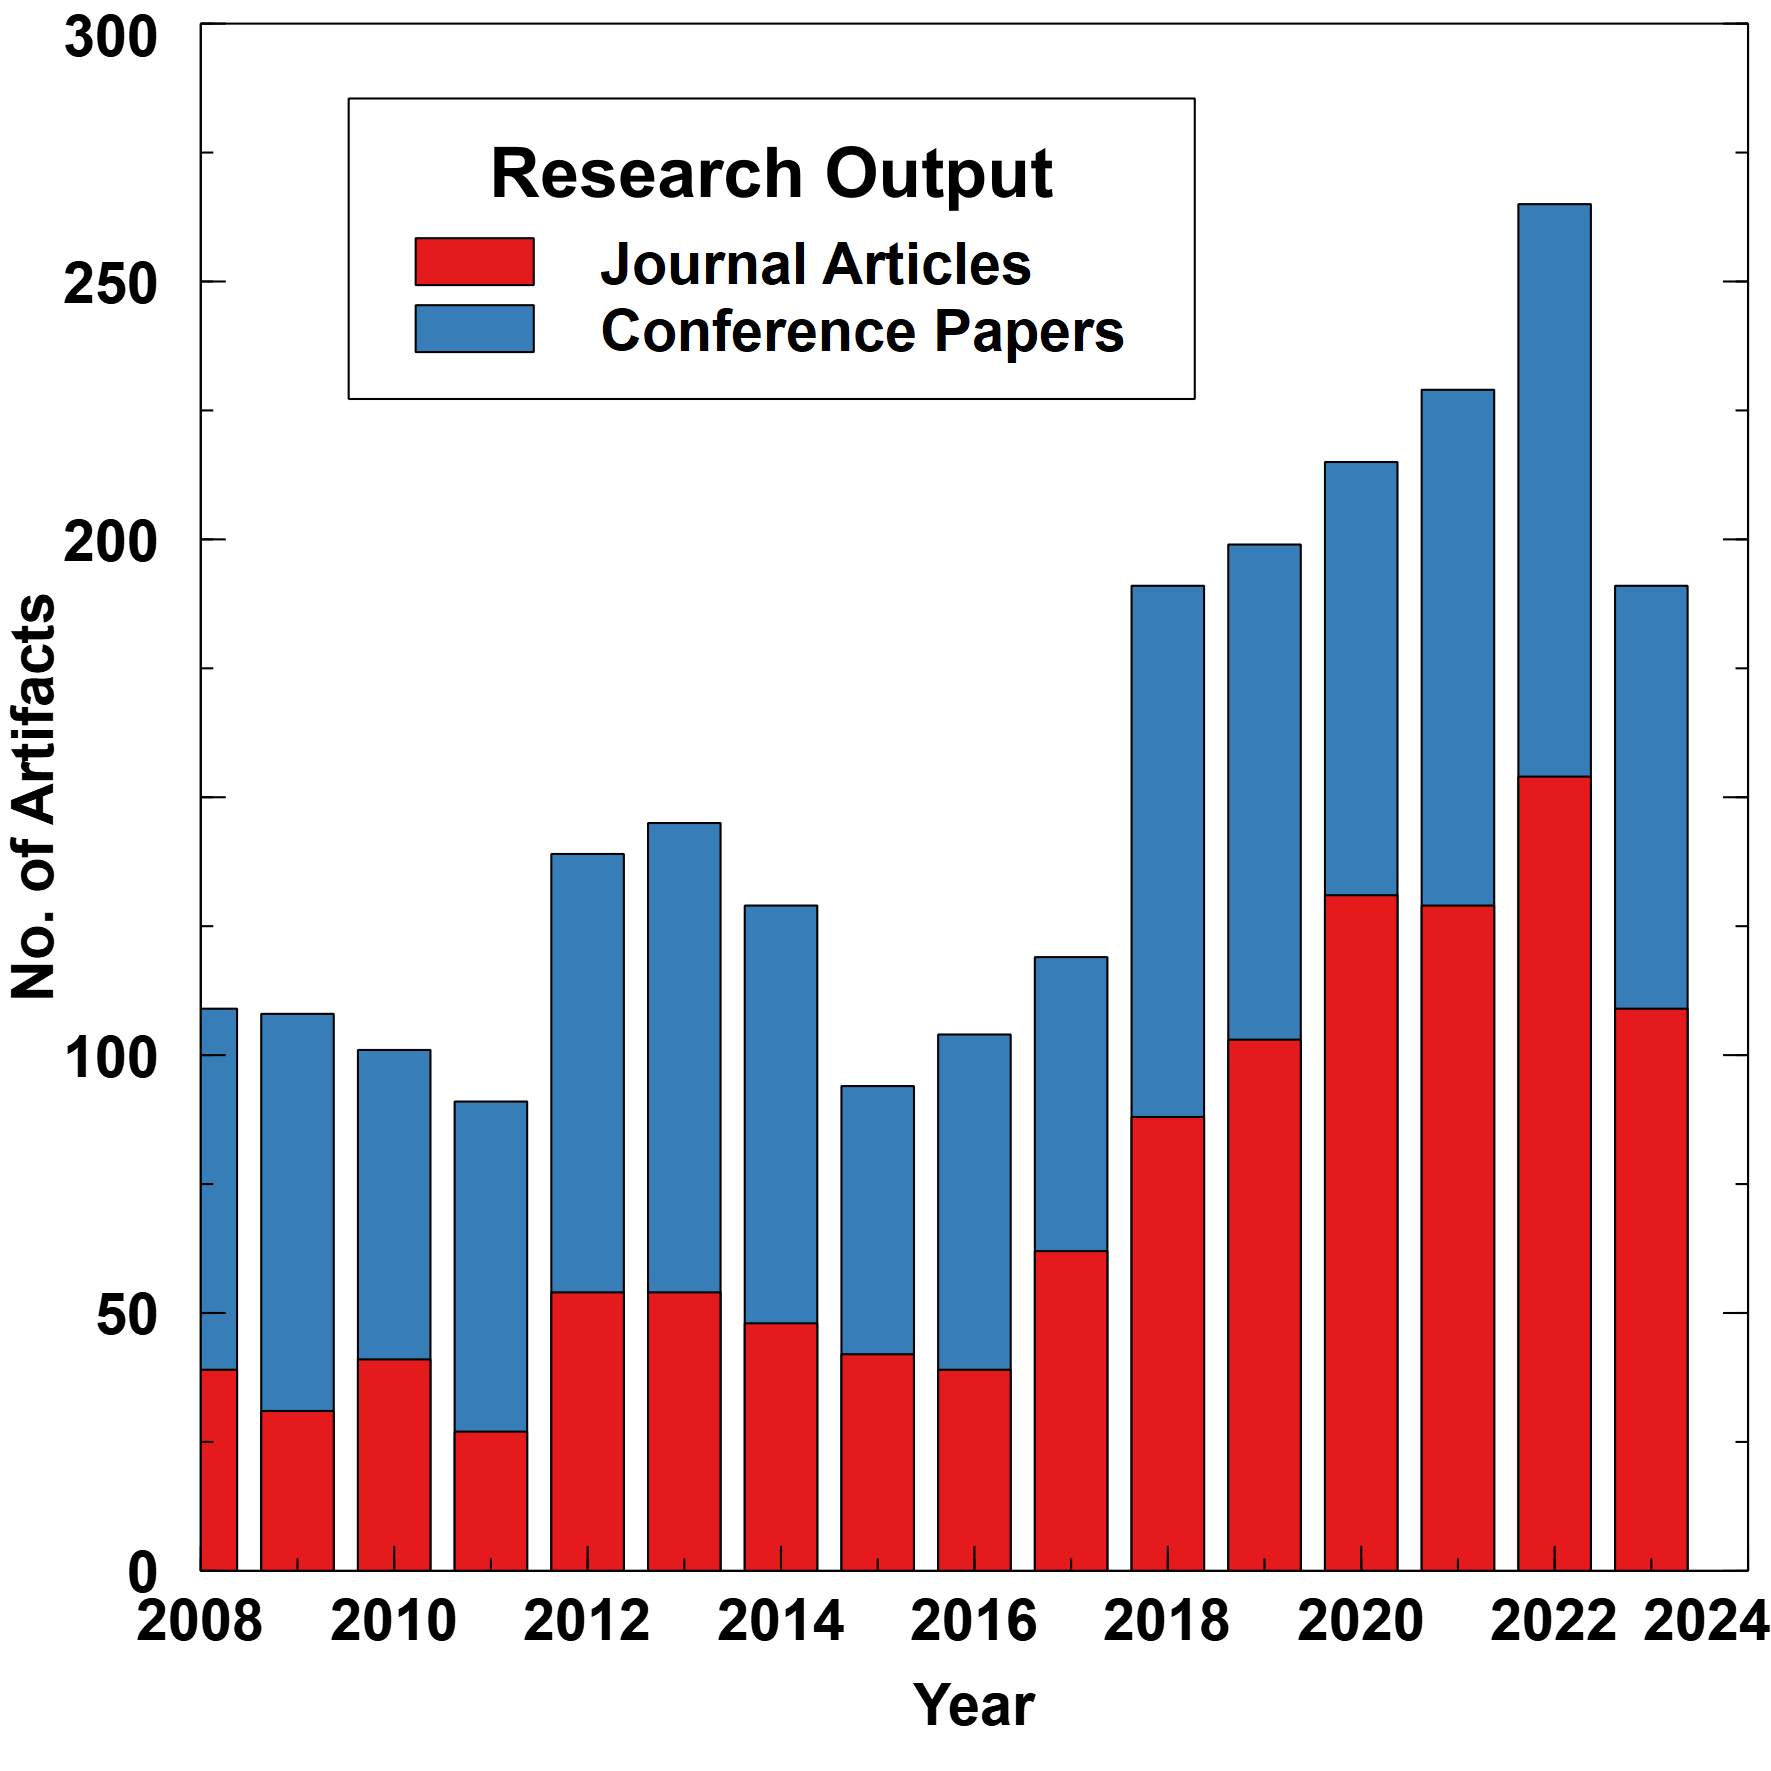 Research Output